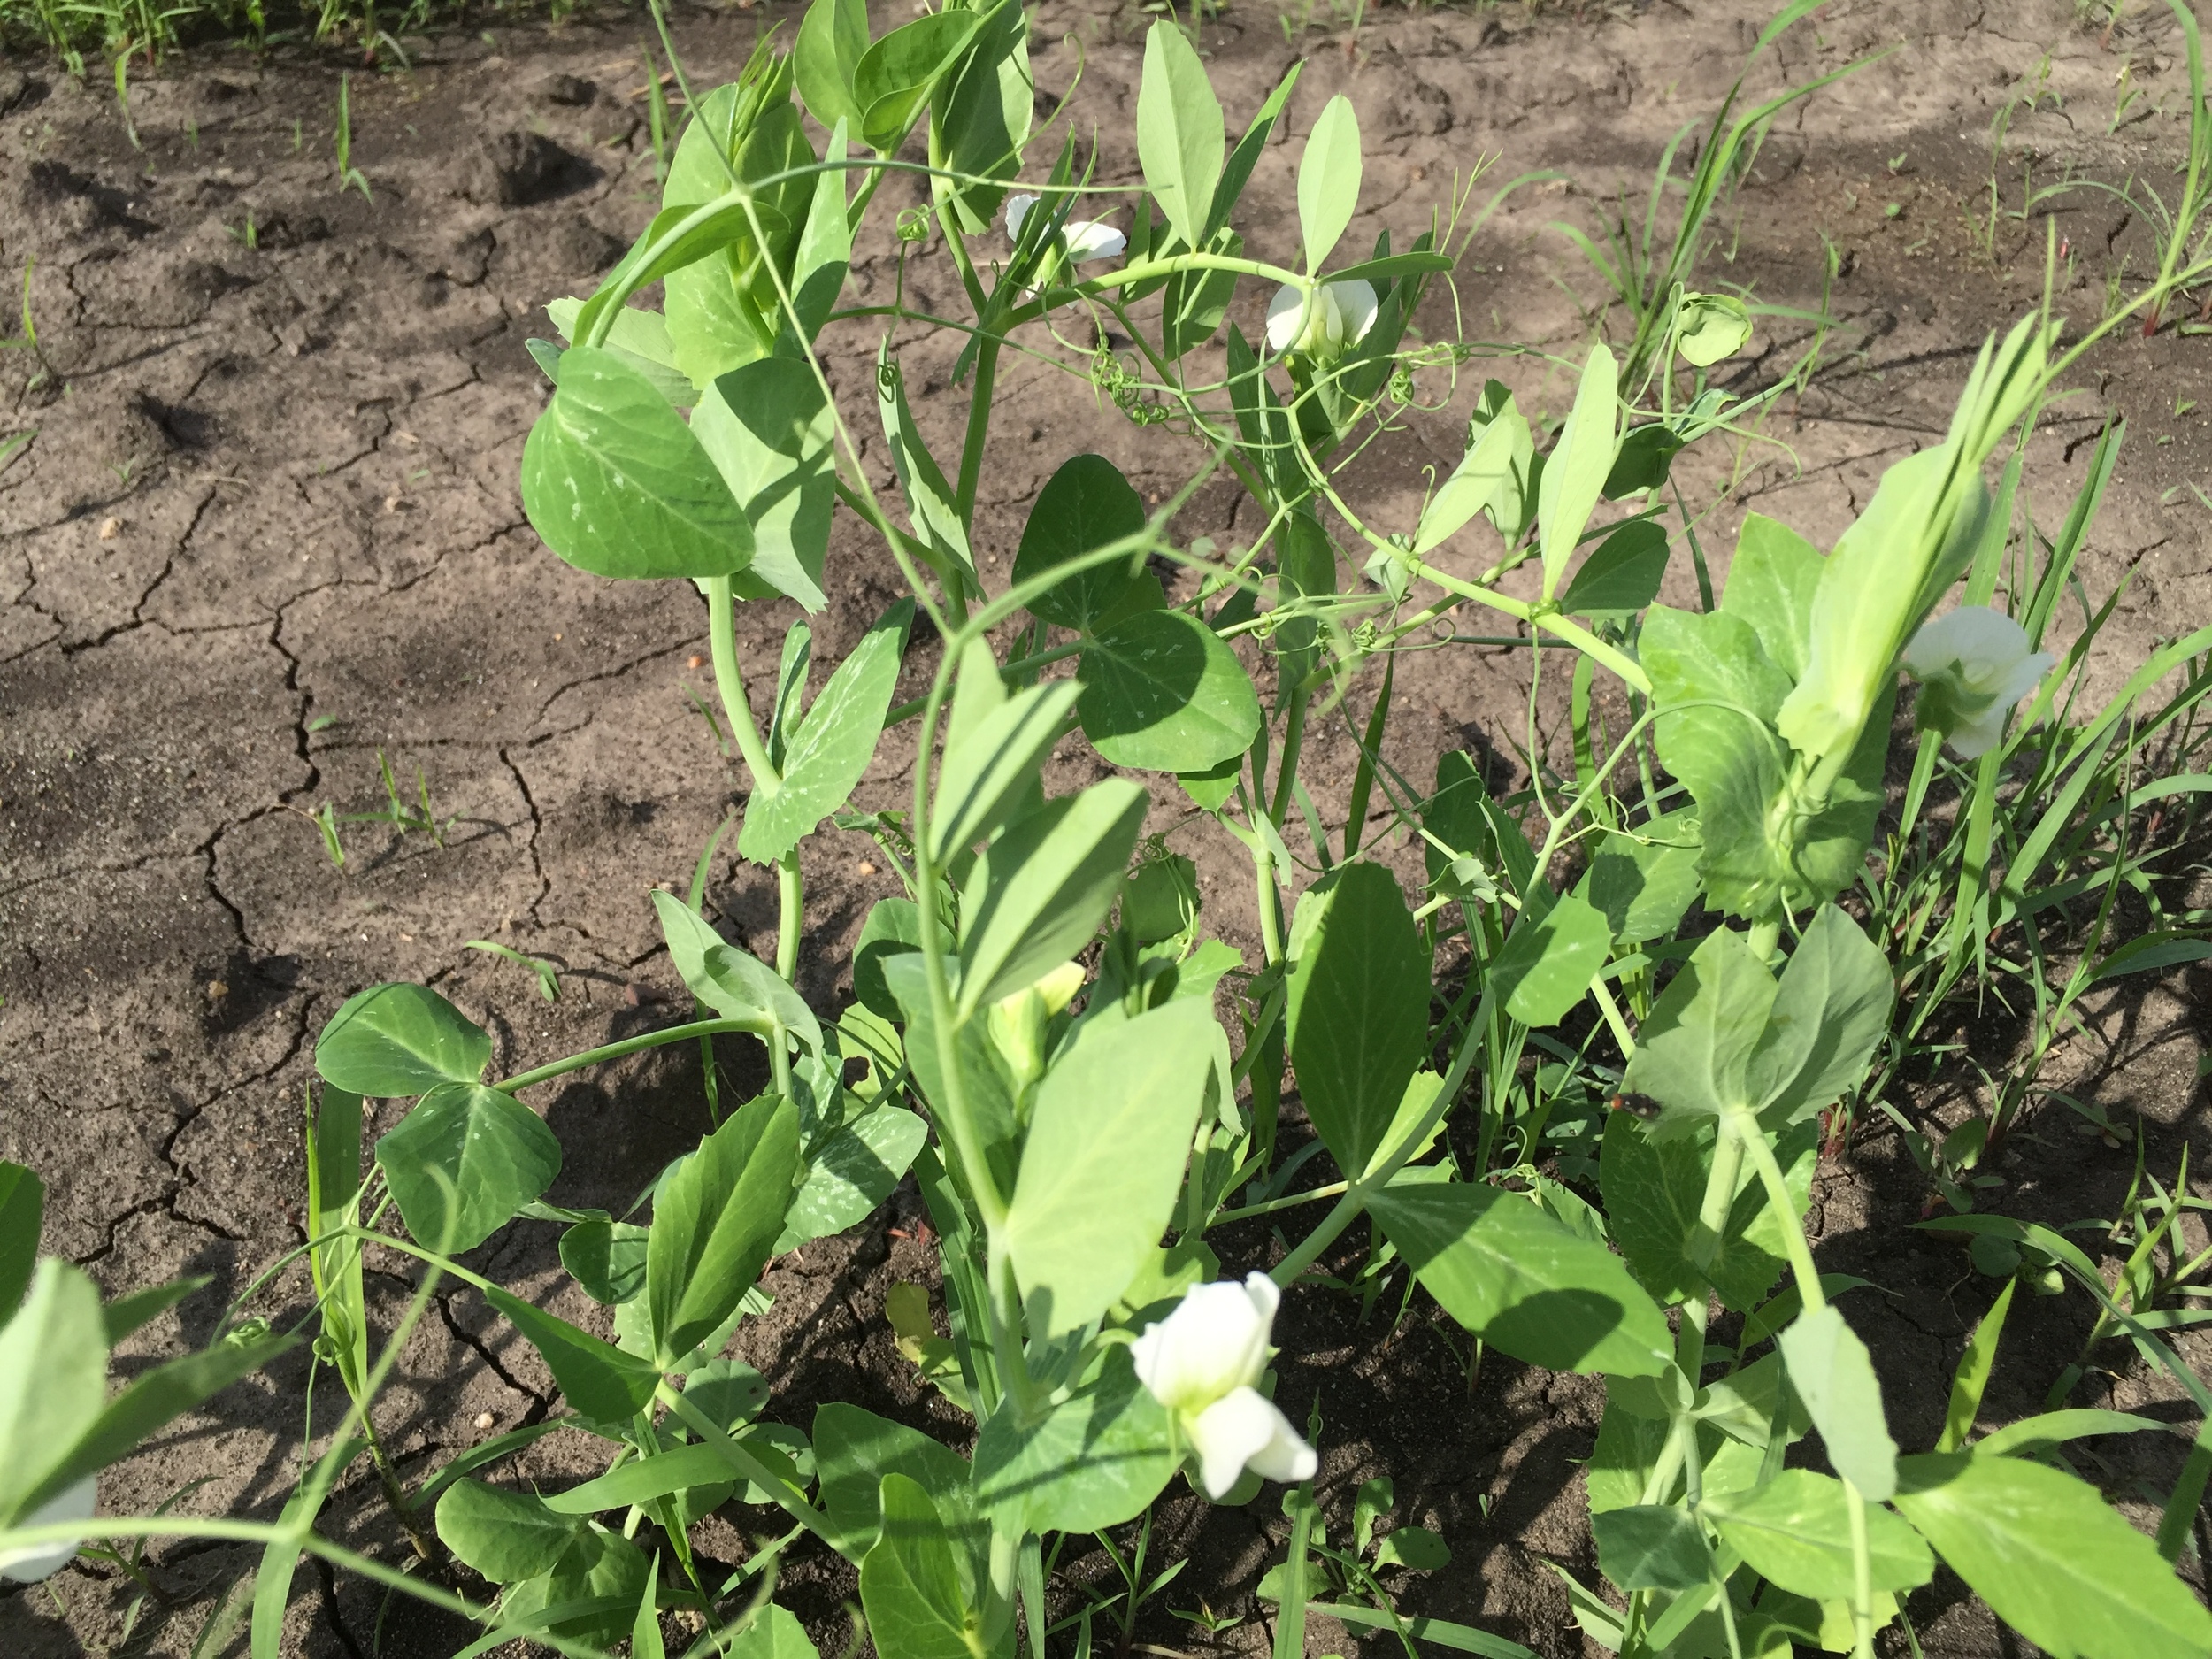  When peas blossom you can estimate edible peas are 3 weeks away. 